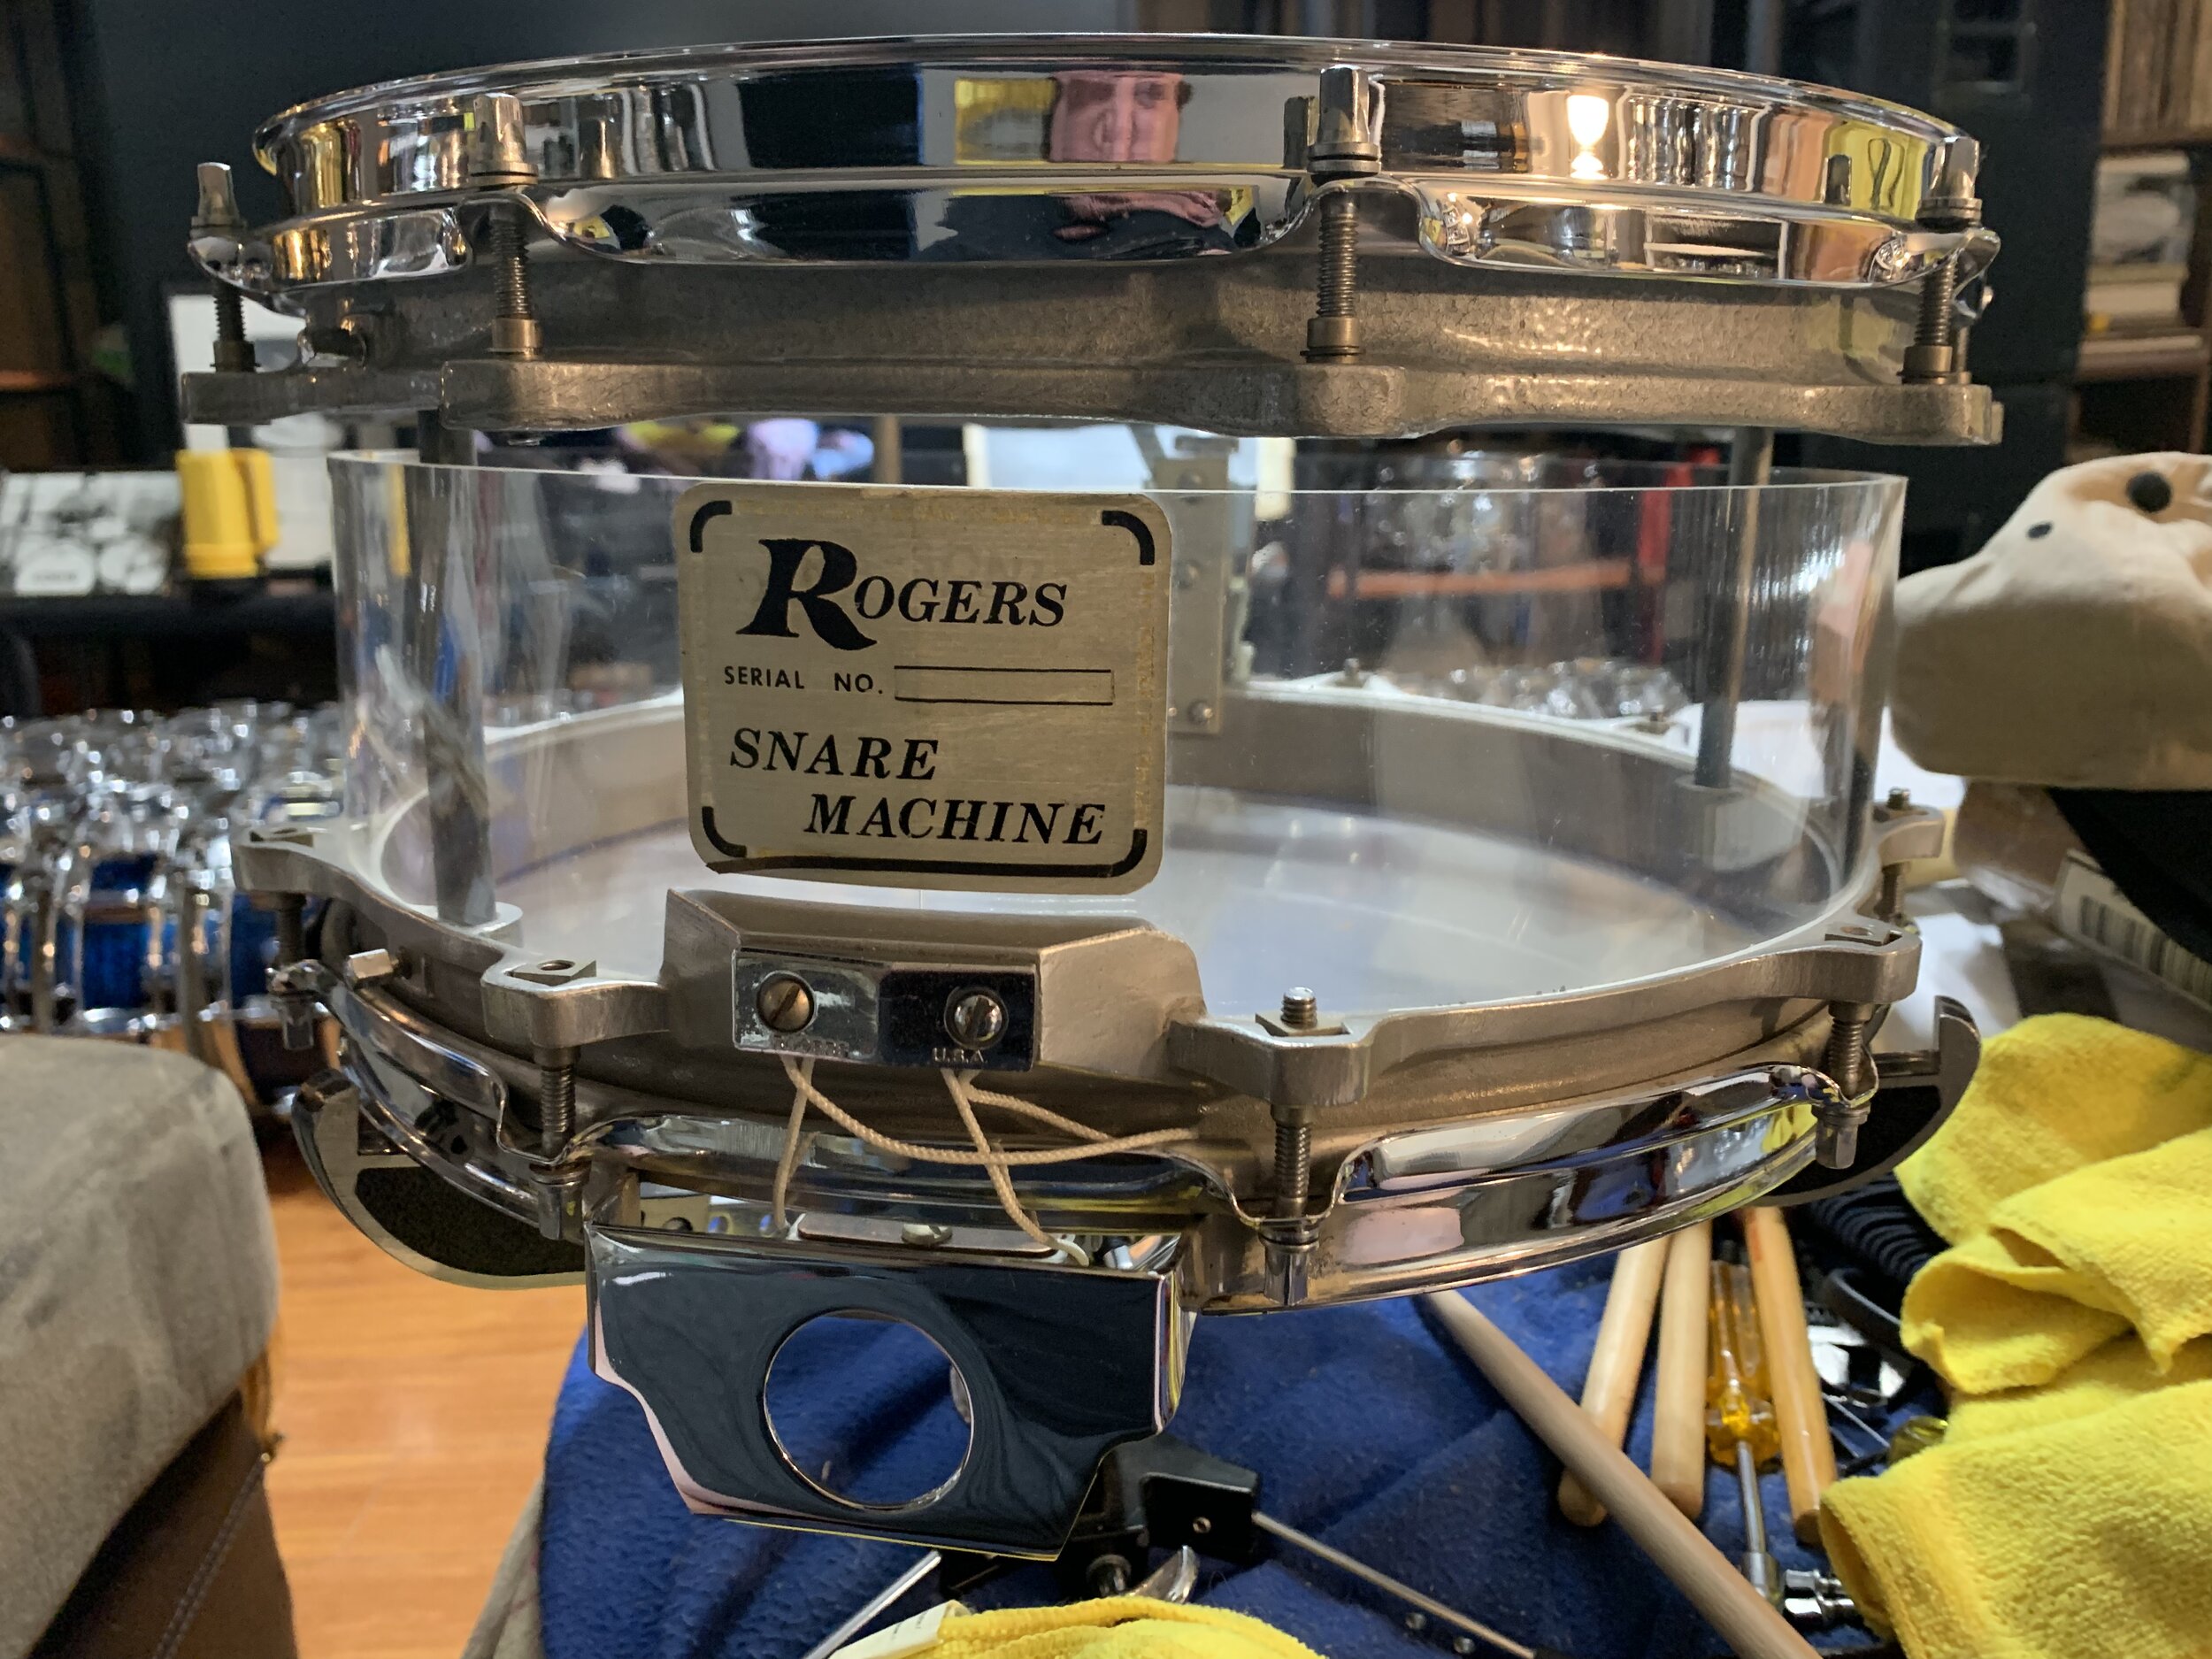 Rogers "Snare Machine" designed by Forrest Clark in mid 70’s - 6.5 Dyna•Sonic used by Harvey Mason and Roy Burns